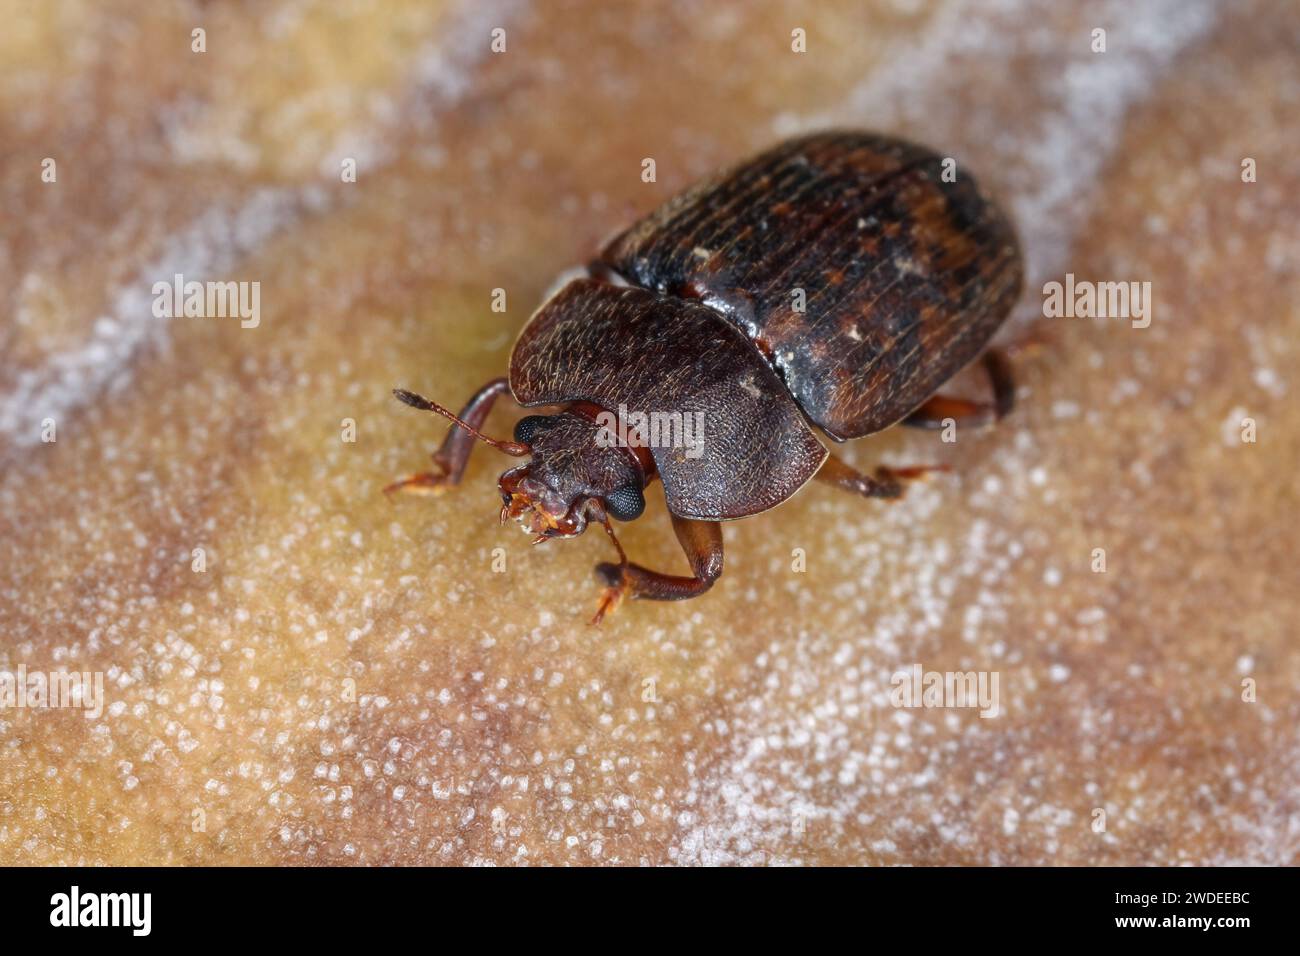 The sap beetle, also known as Nitidulidae. The insect was feeding in the ripe fruit, Mauritius. Stock Photo